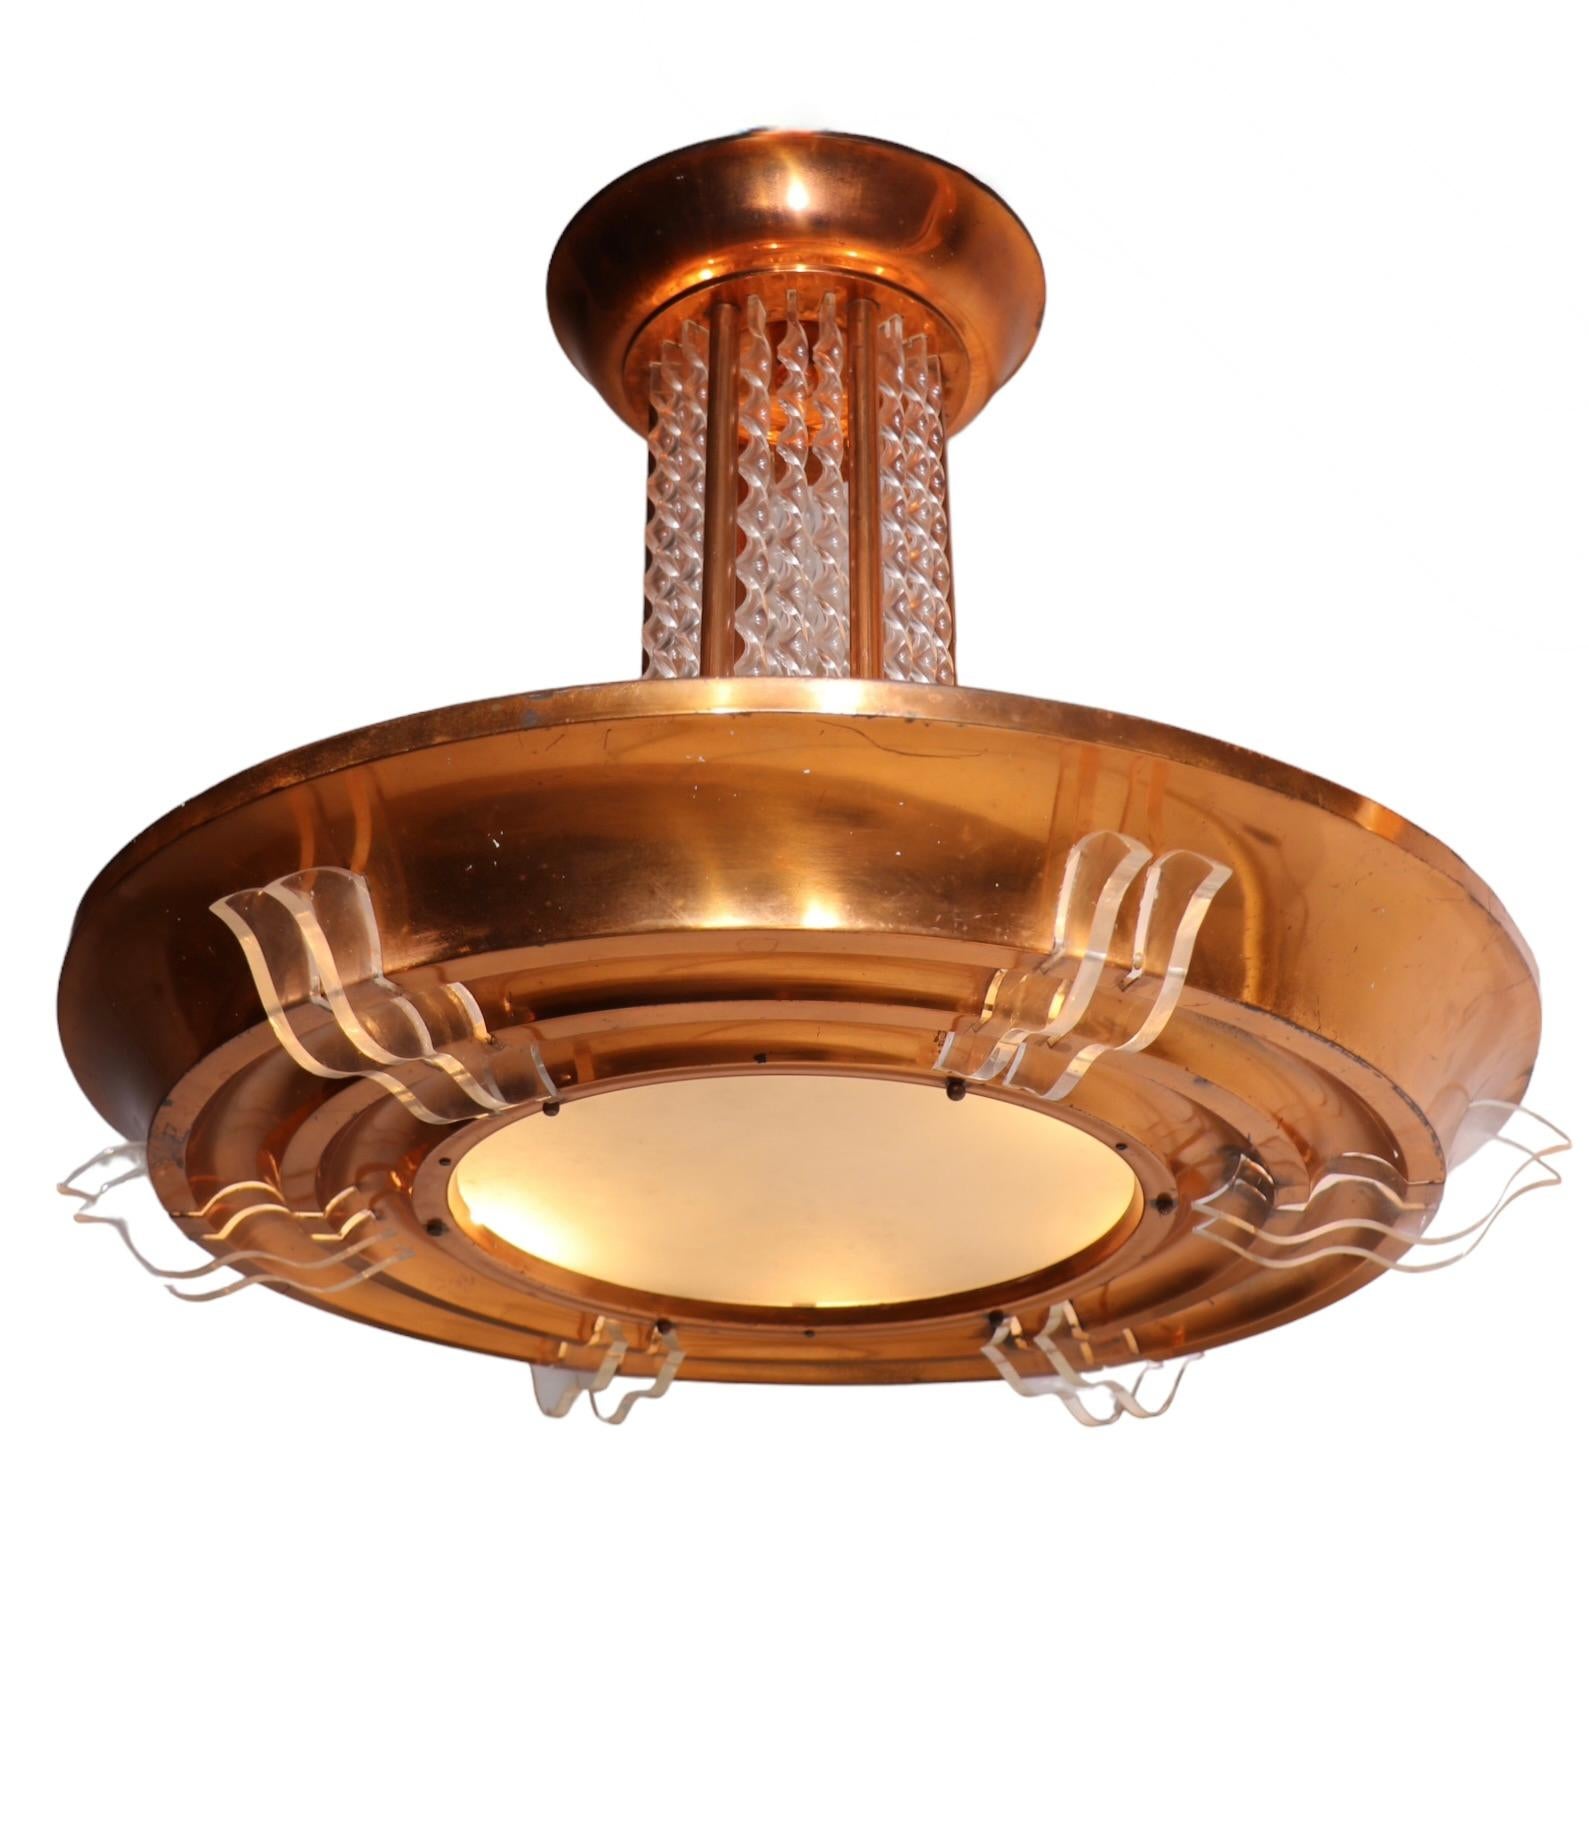 Large Art Deco Copper and Lucite Chandelier, circa 1930s For Sale 2